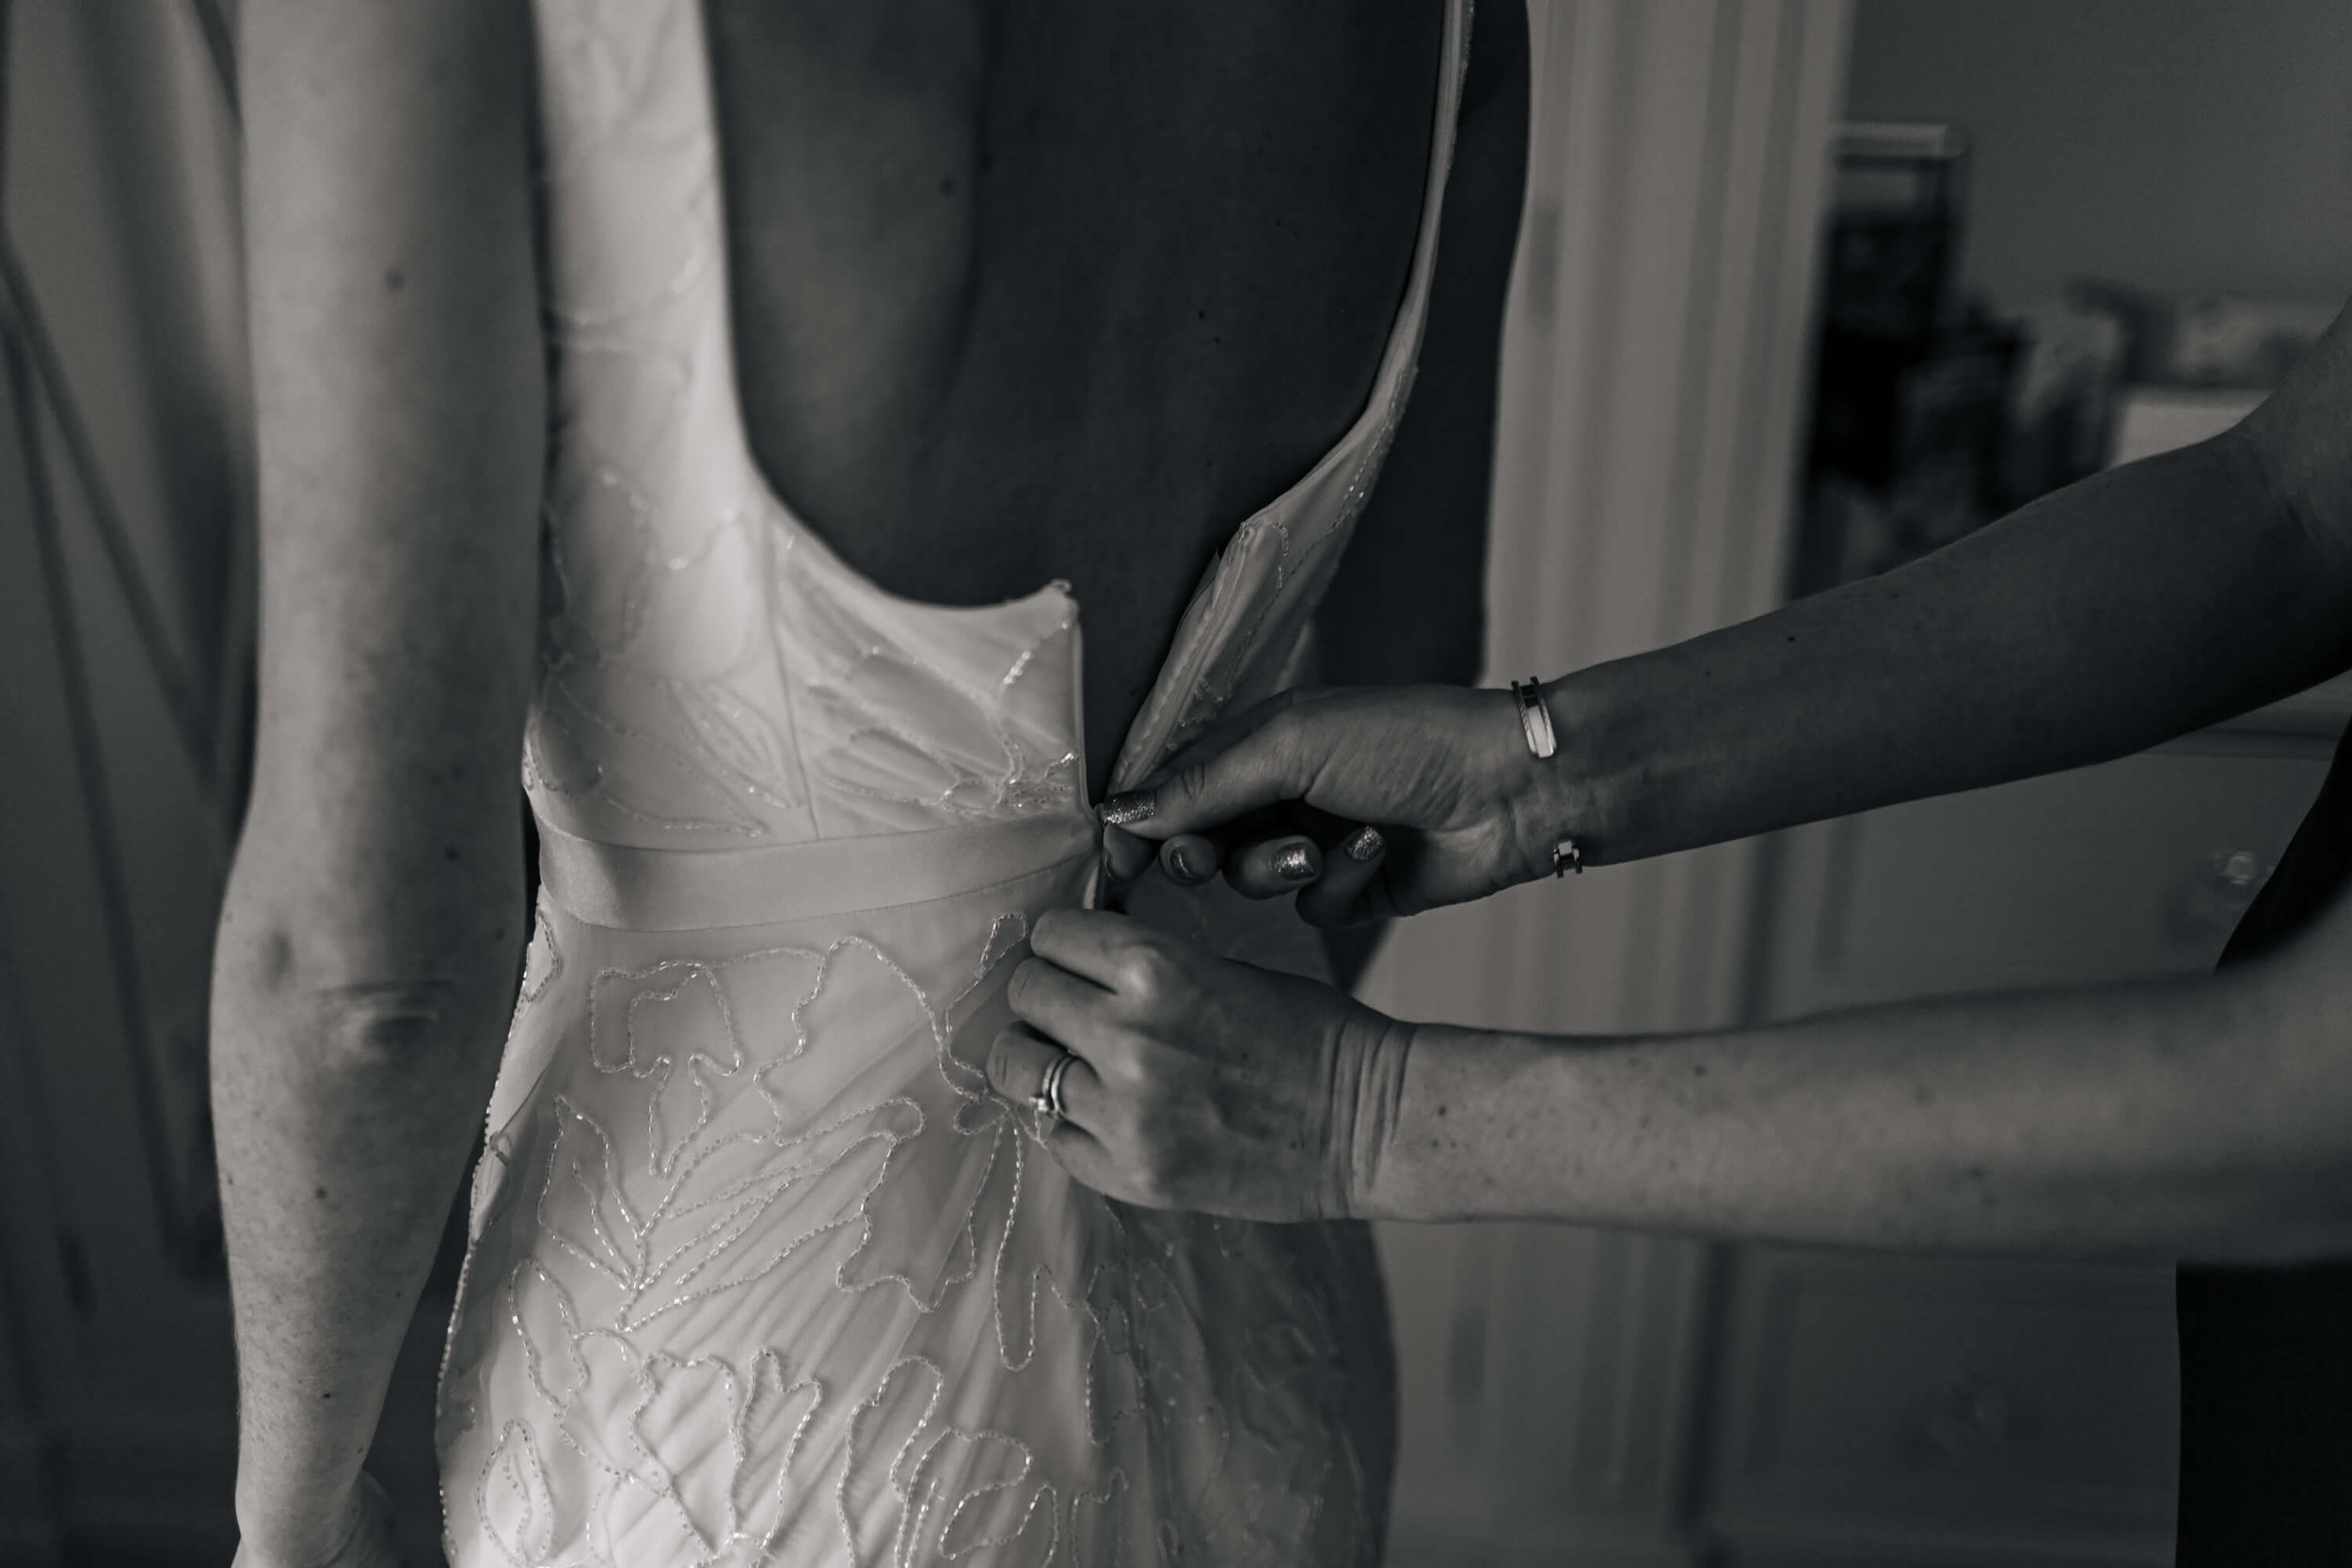 Fastening the bride's wedding dress before the ceremony